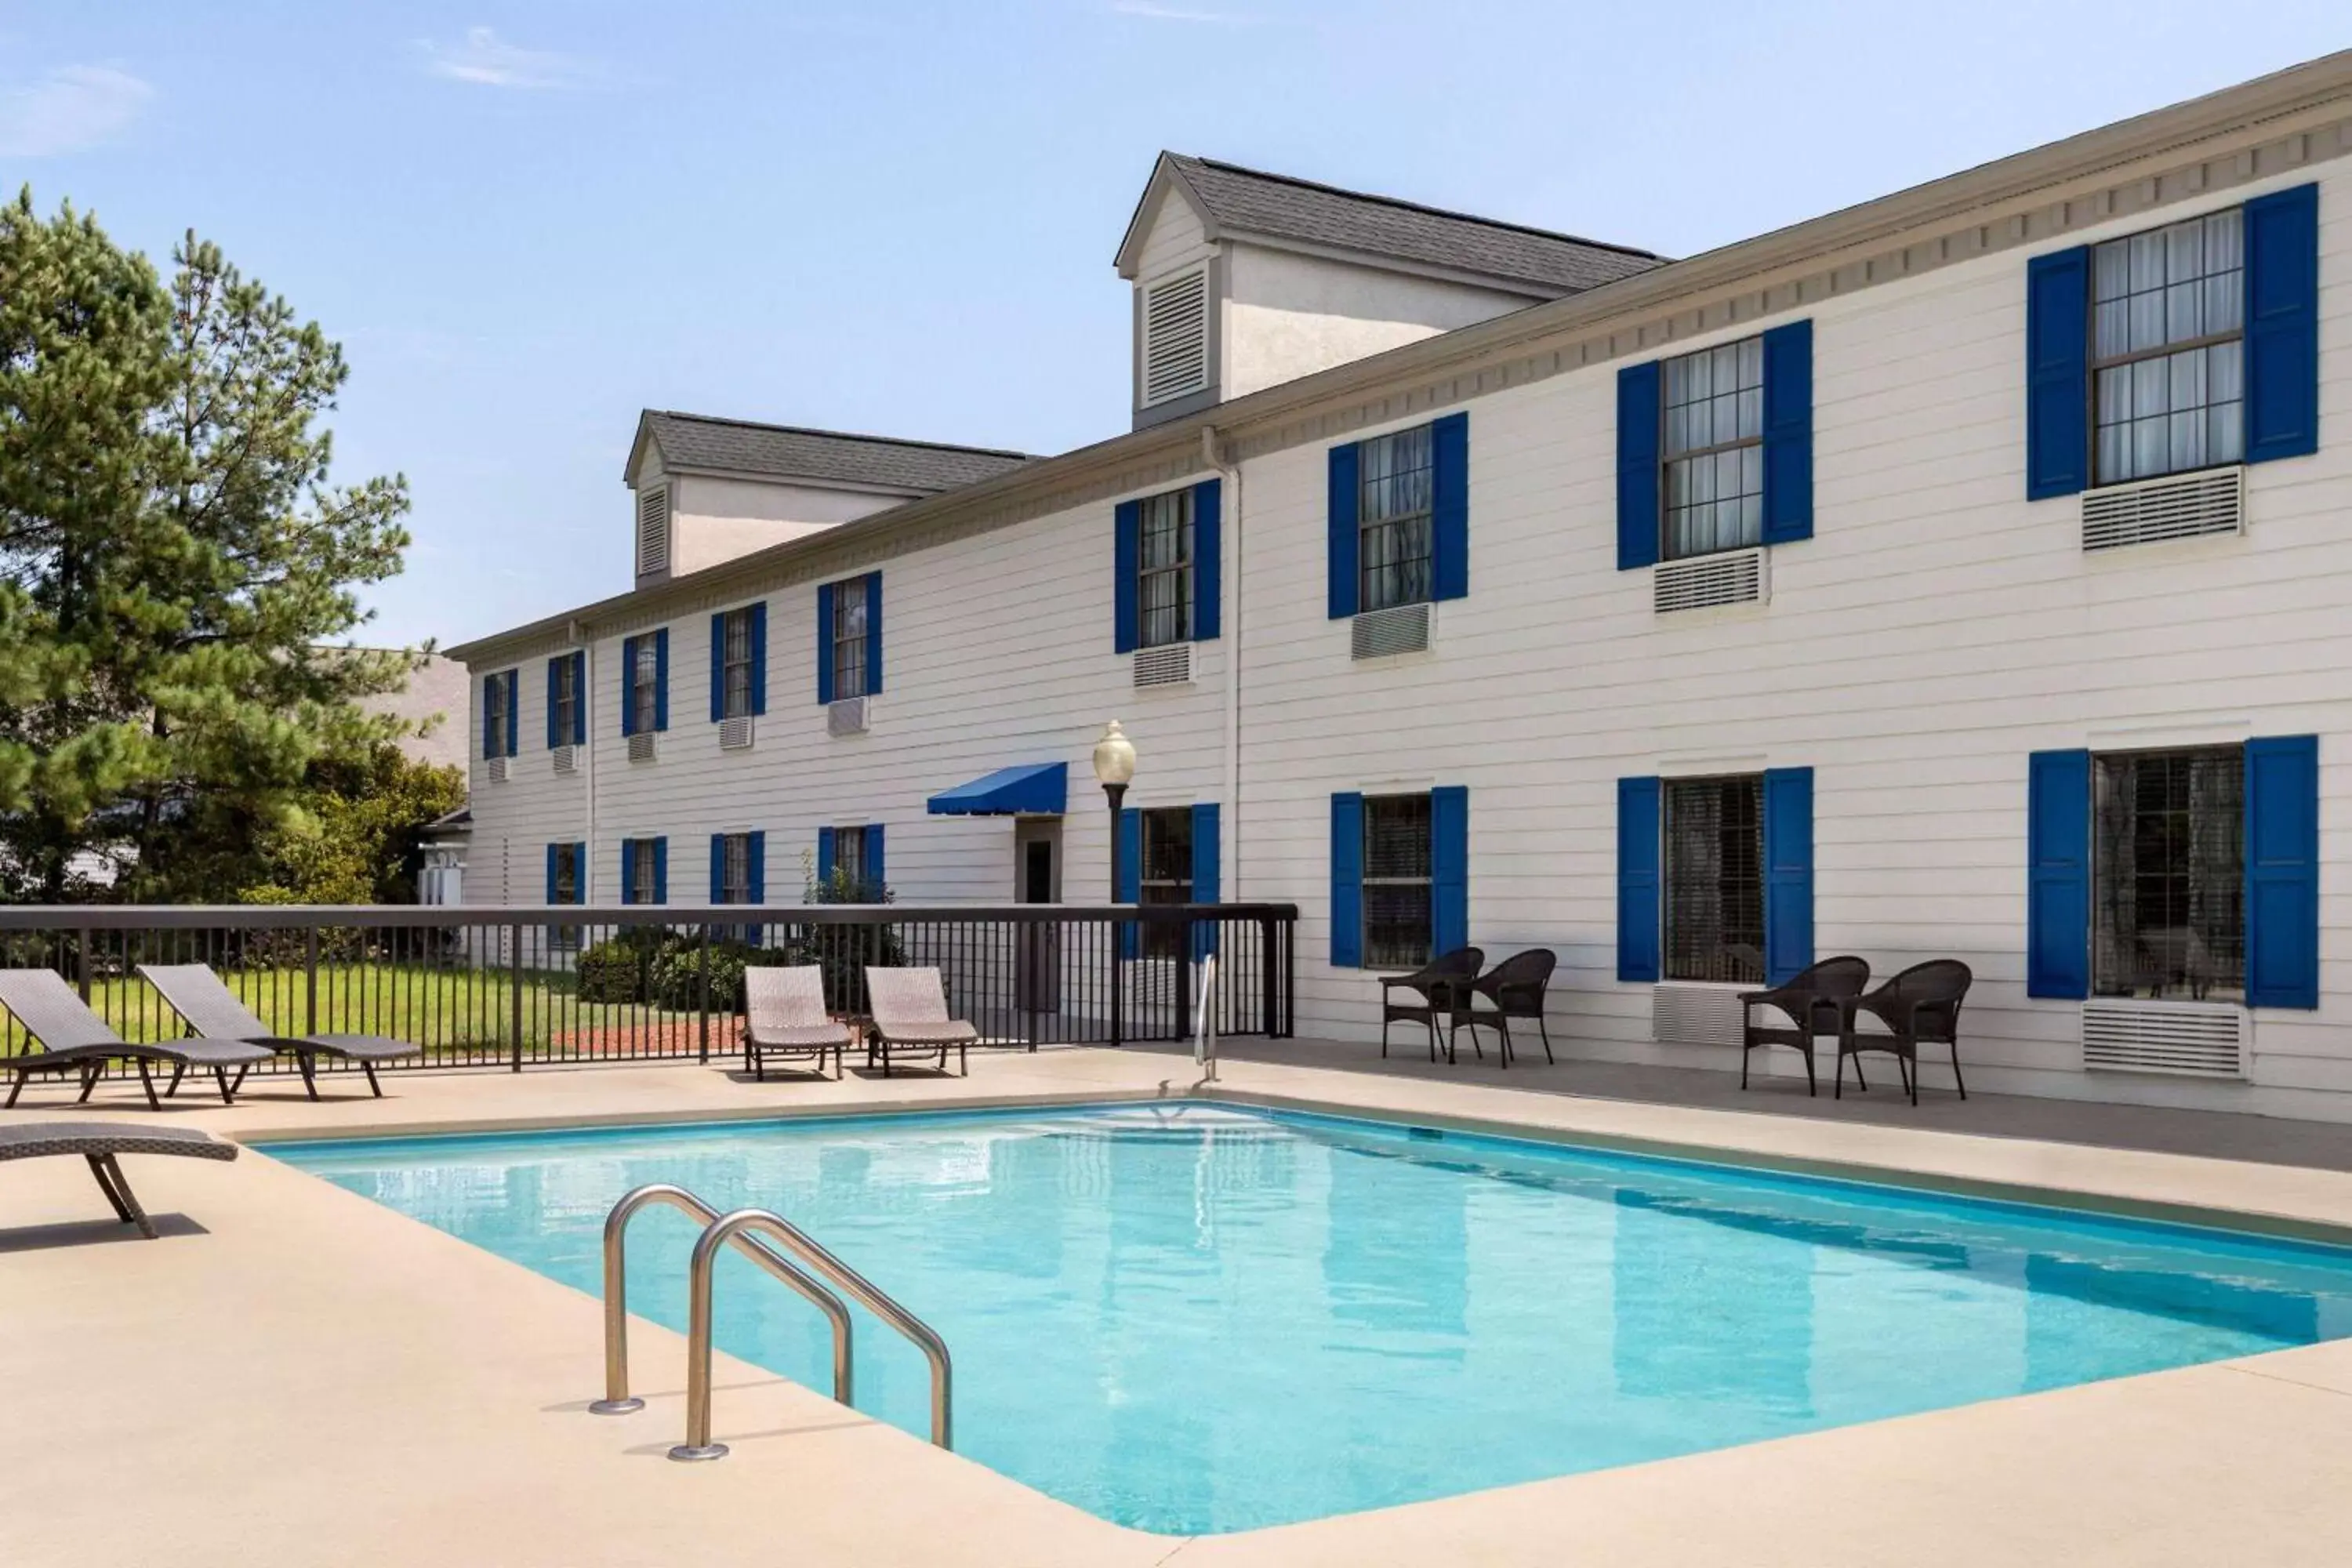 Swimming pool, Property Building in Days Inn by Wyndham Shallotte